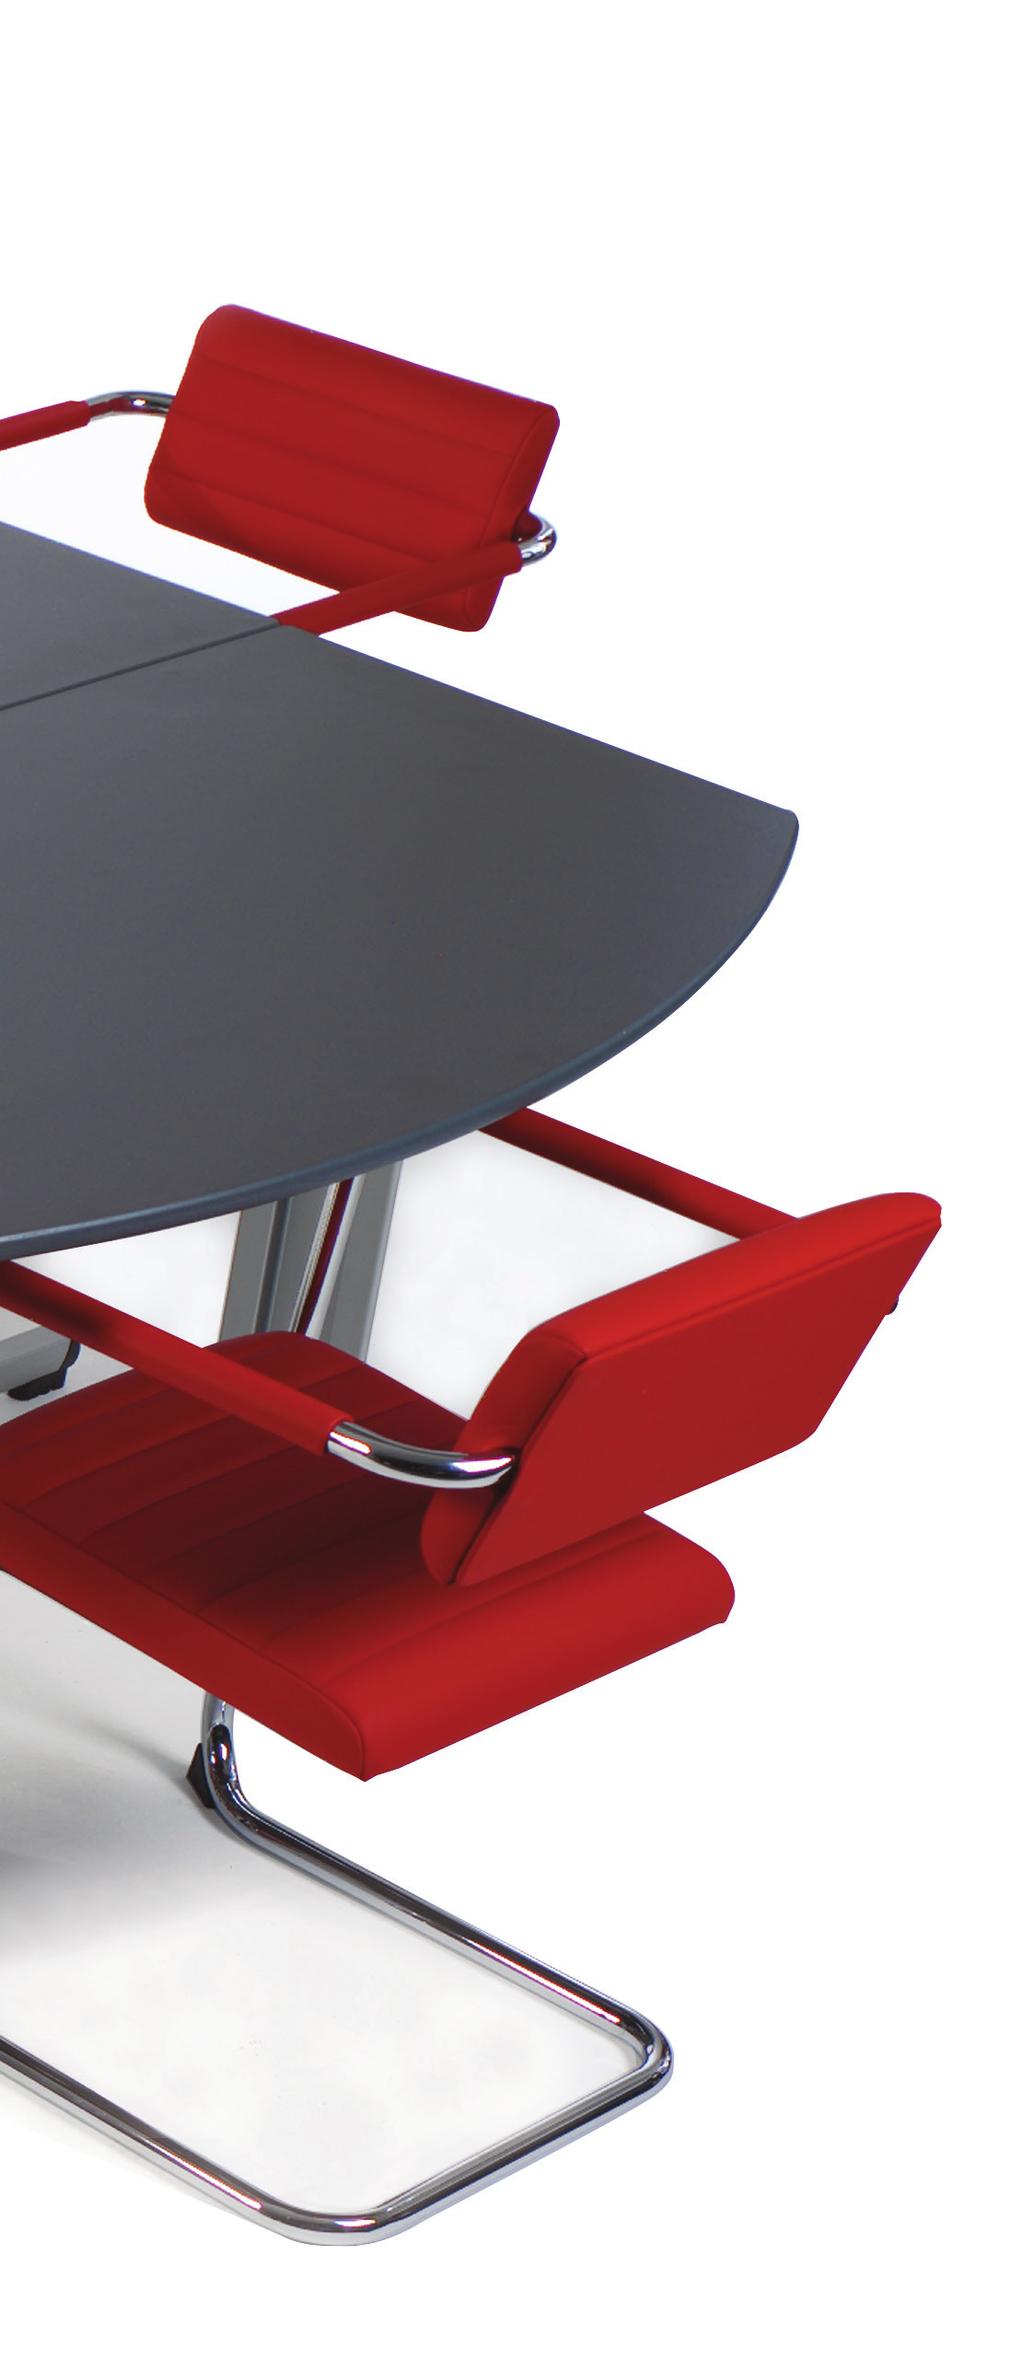 The Configure-8 table range offers a stunningly superior look.